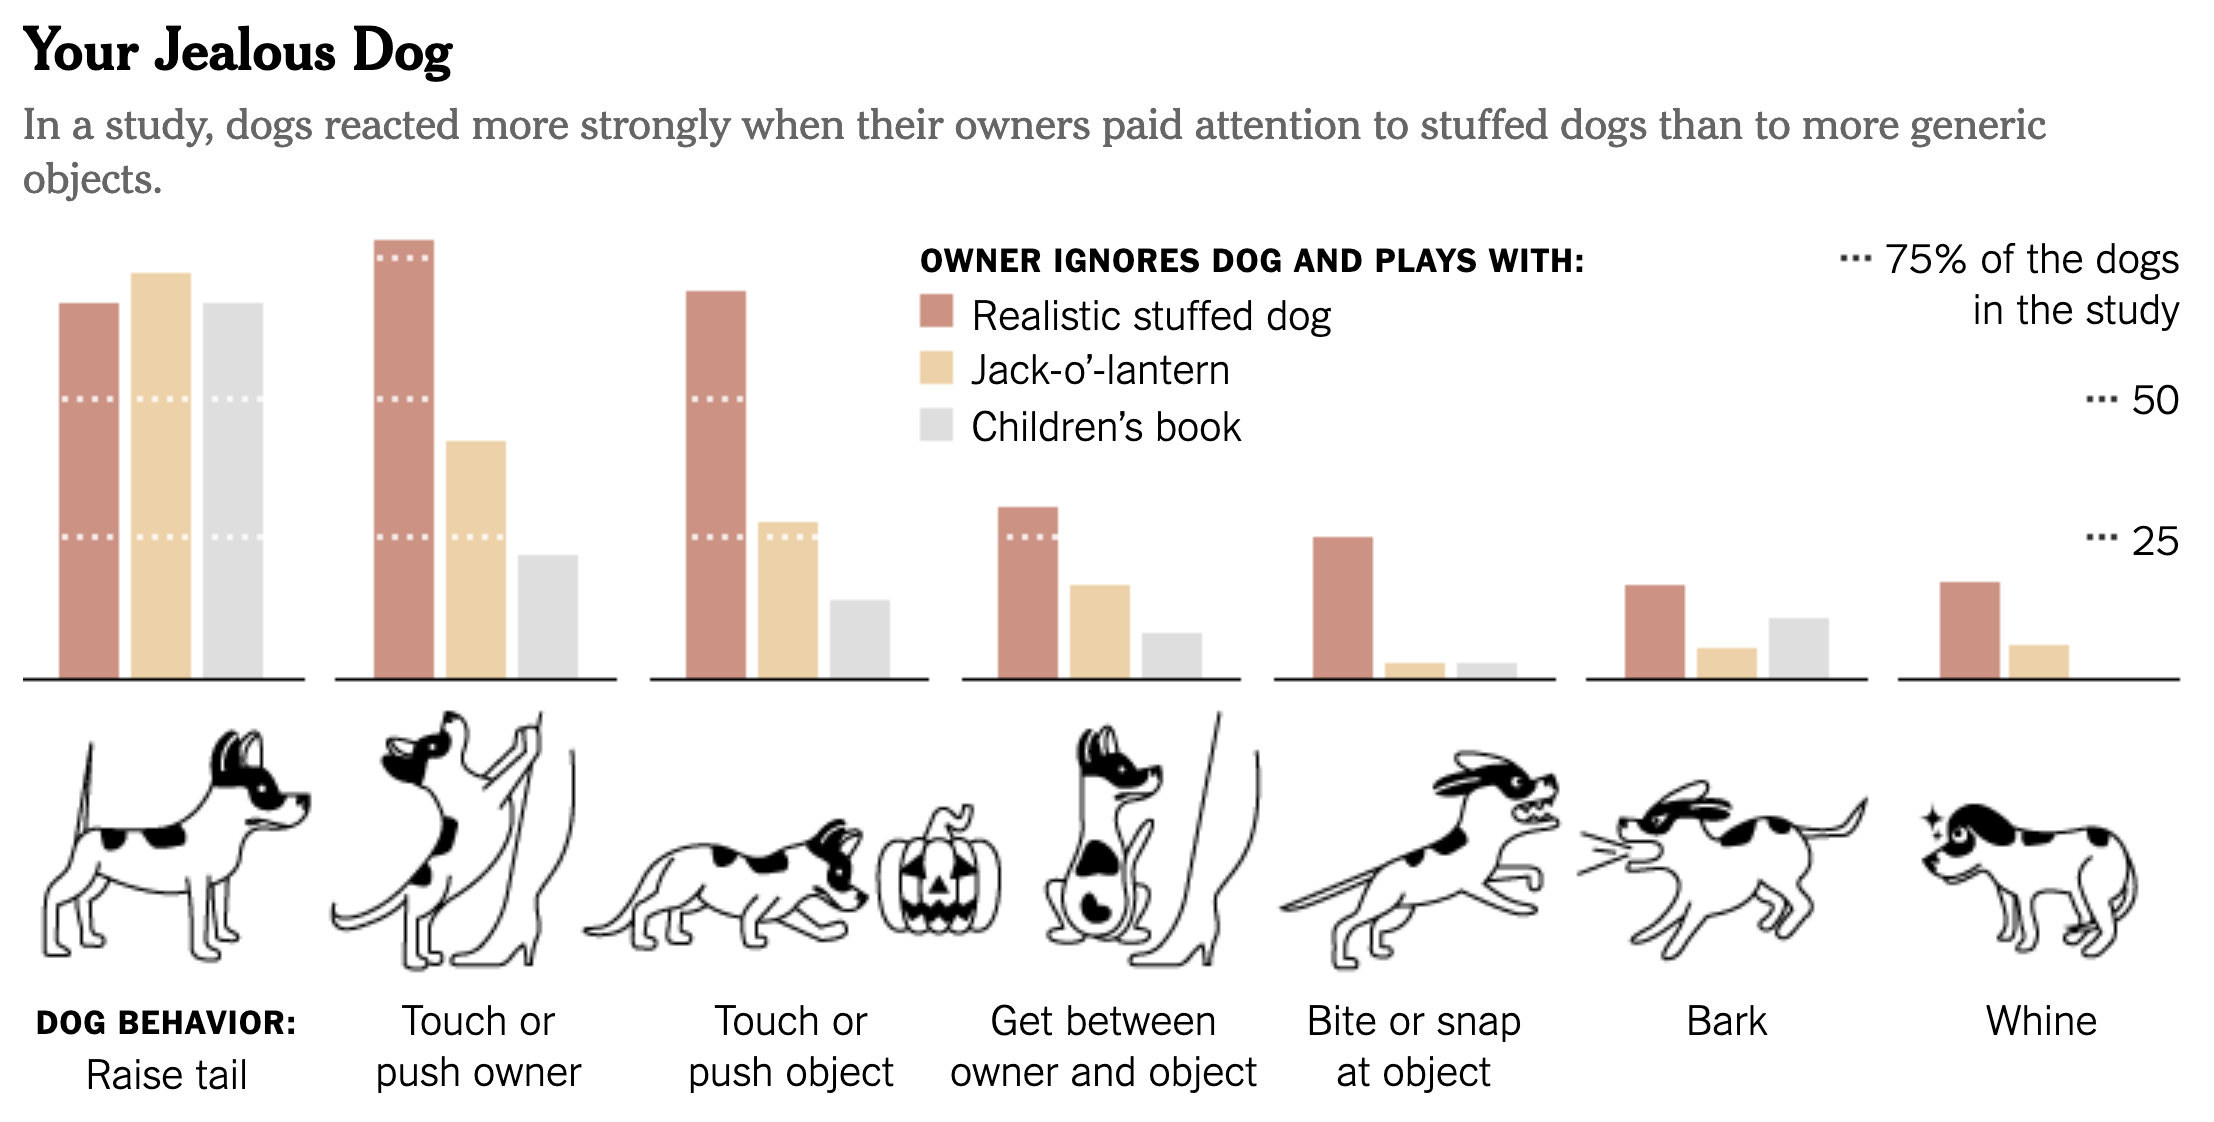 The same chart as above, but with little drawings of dog exhibiting certain behaviours